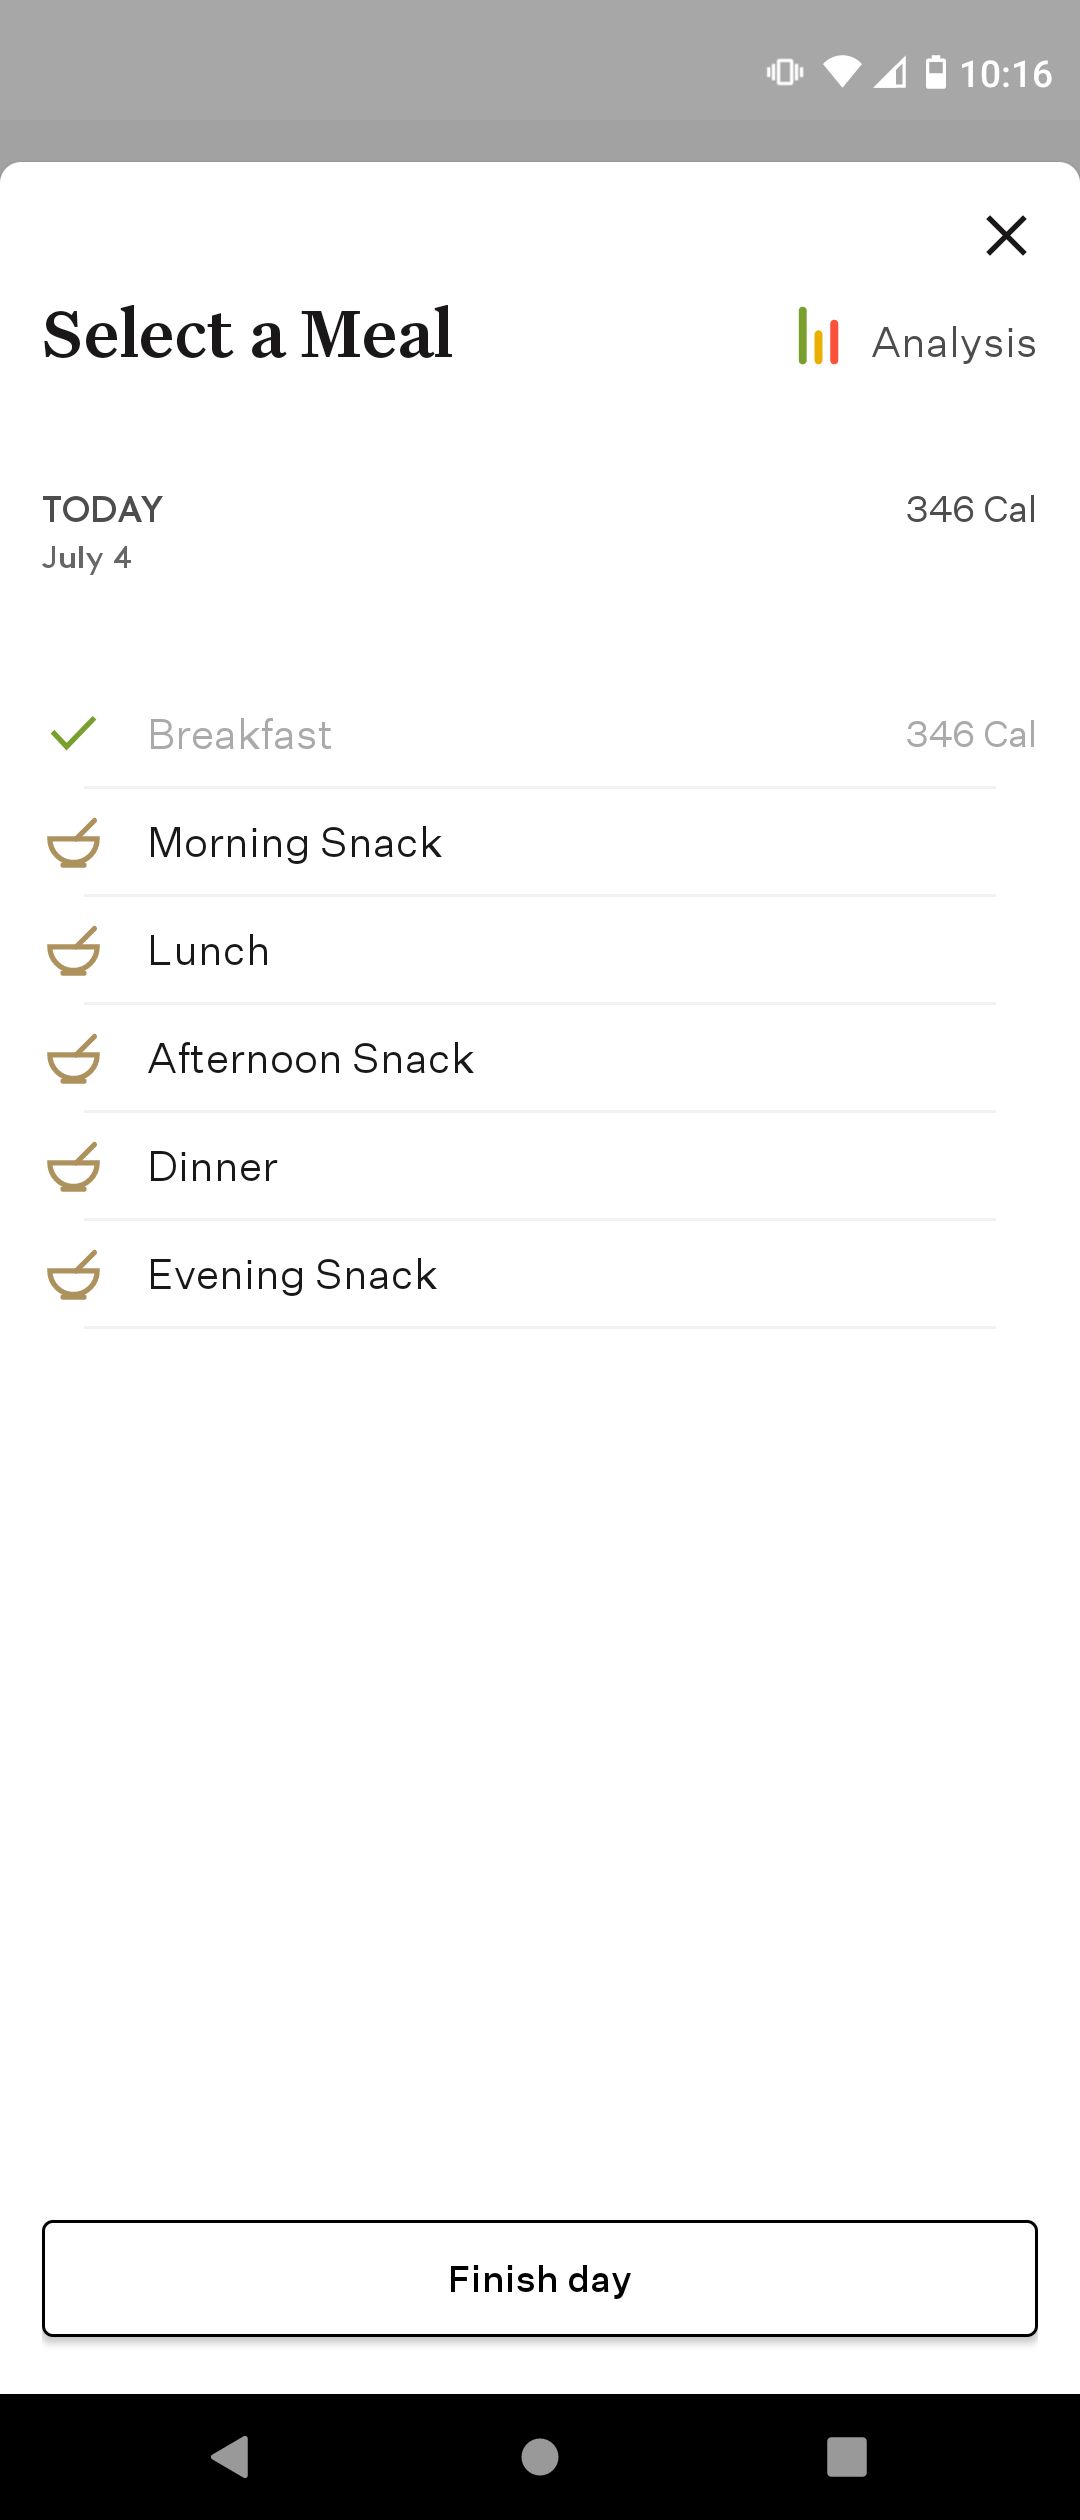 Food Diary and Analysis on Noom